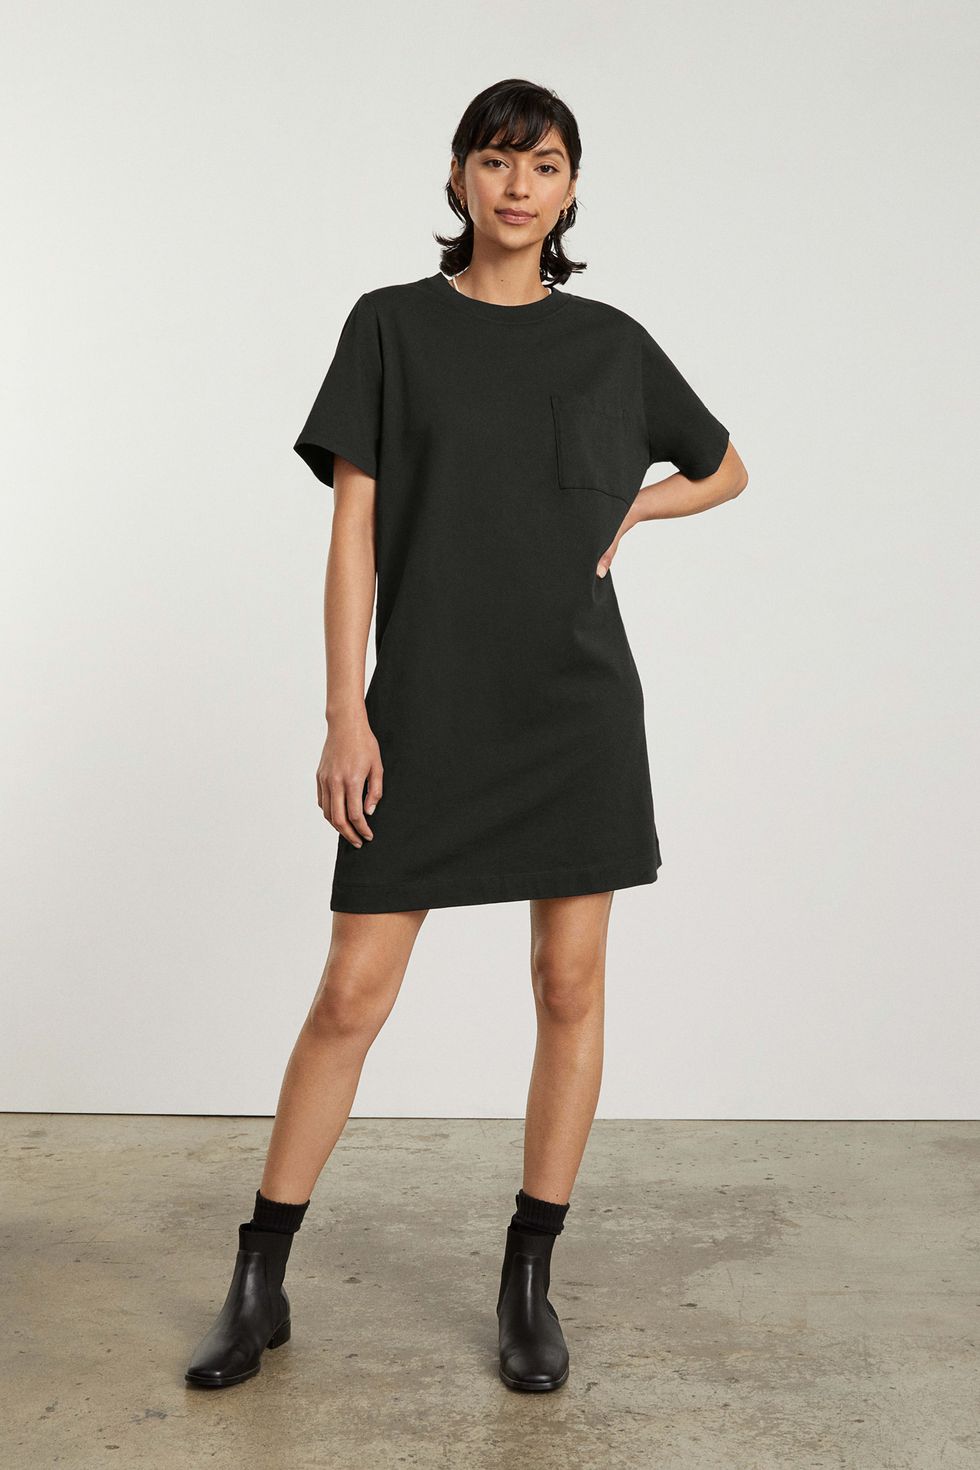 Dress Down This Summer with the 9 Best T-Shirt Dresses! (2021)